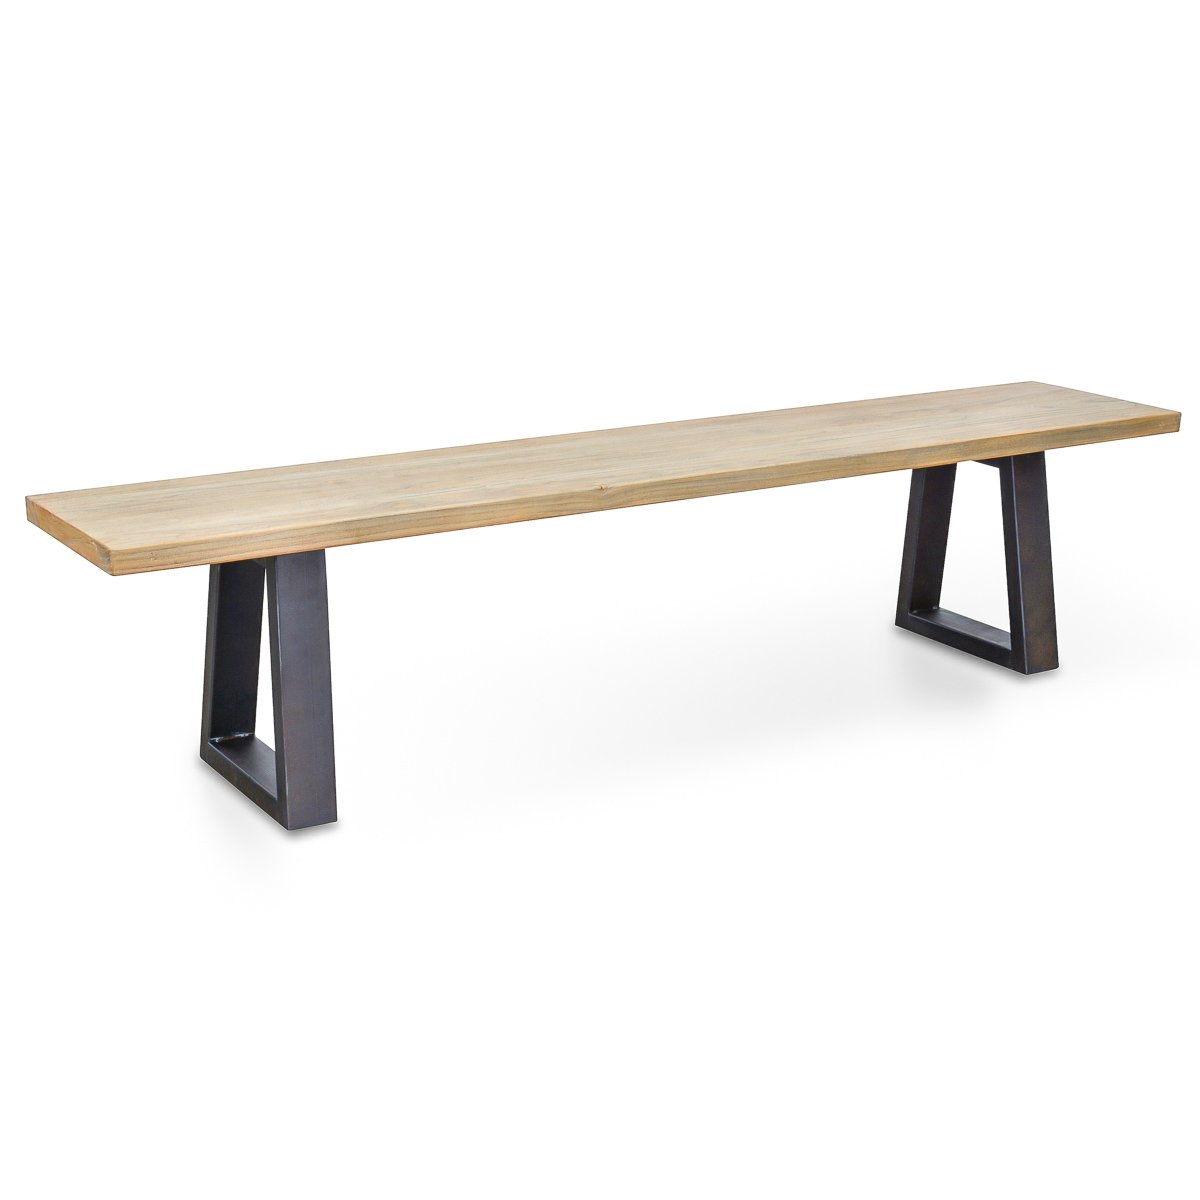 Ethan Reclaimed Elm Wood Bench - Natural - Bench